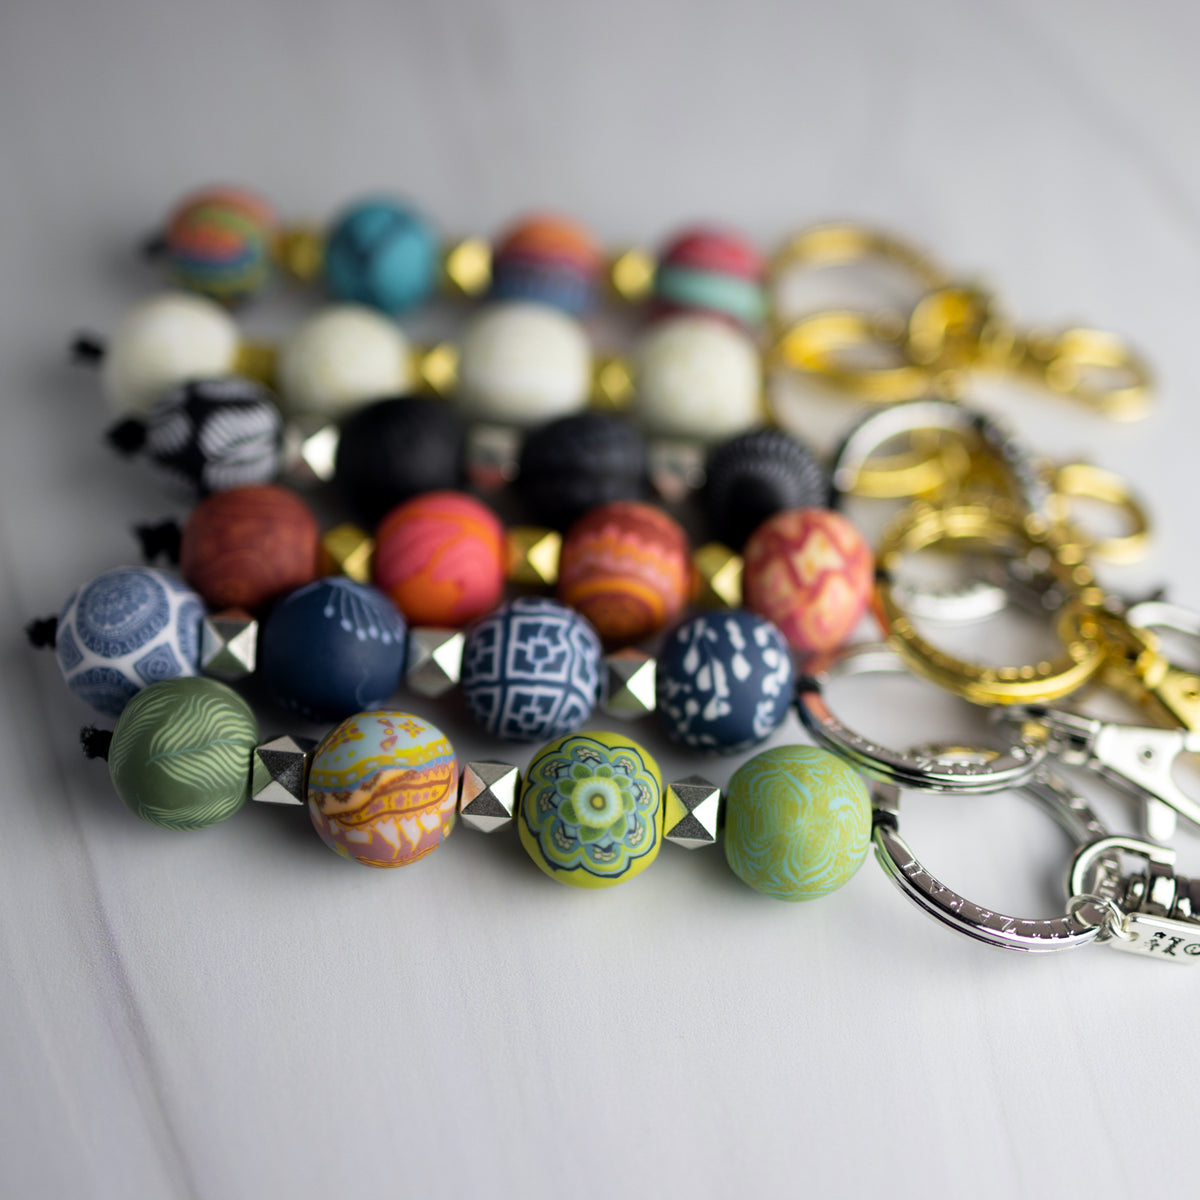 Essential Collection 4-Ball Keychain Variety Pack